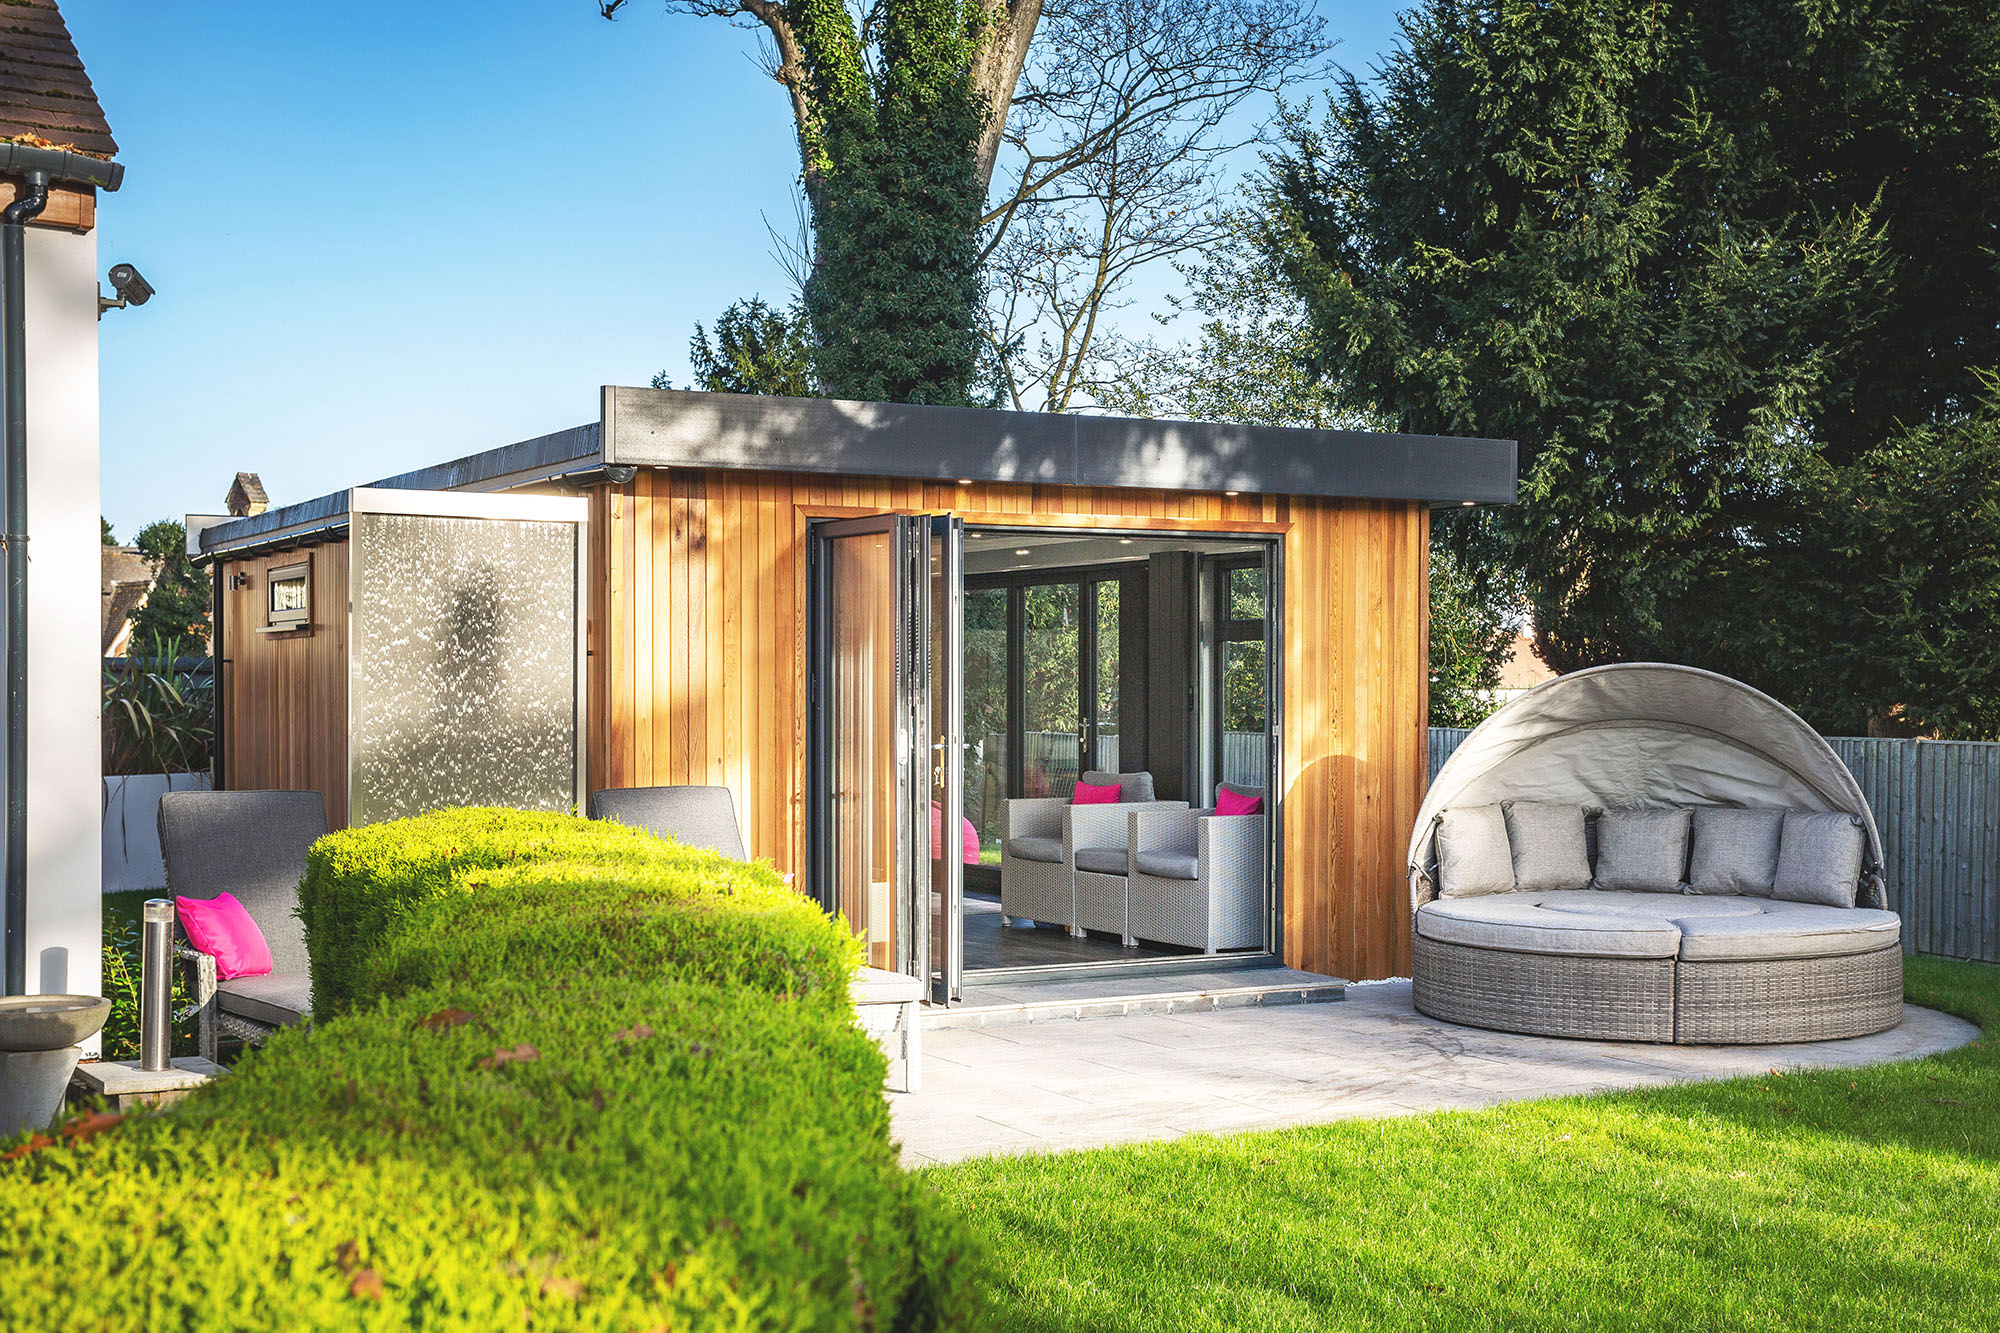 Why should you have bifold doors in your garden room